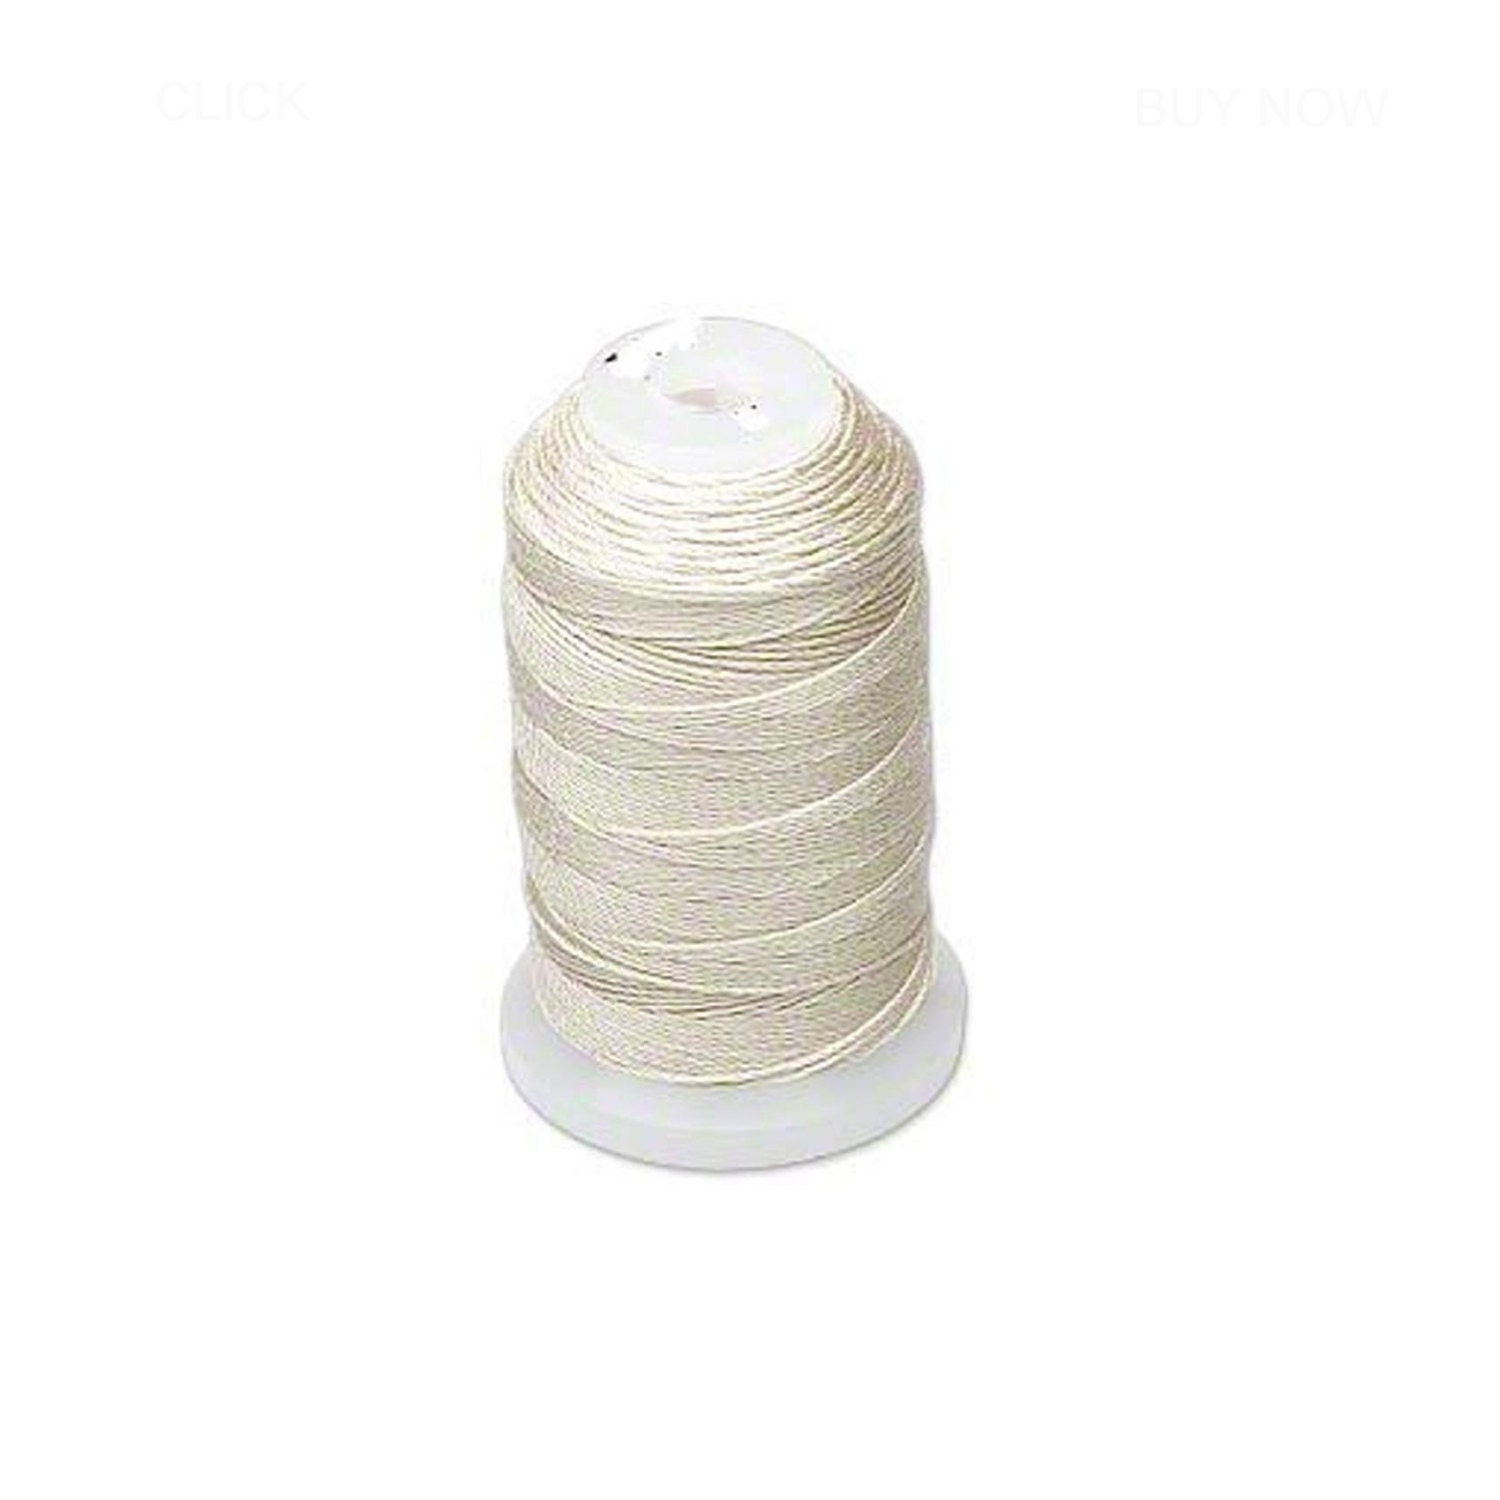 0.70mm Dyed Polyester Braided Jewelry Cord - 7 Yard Spool (CORD8